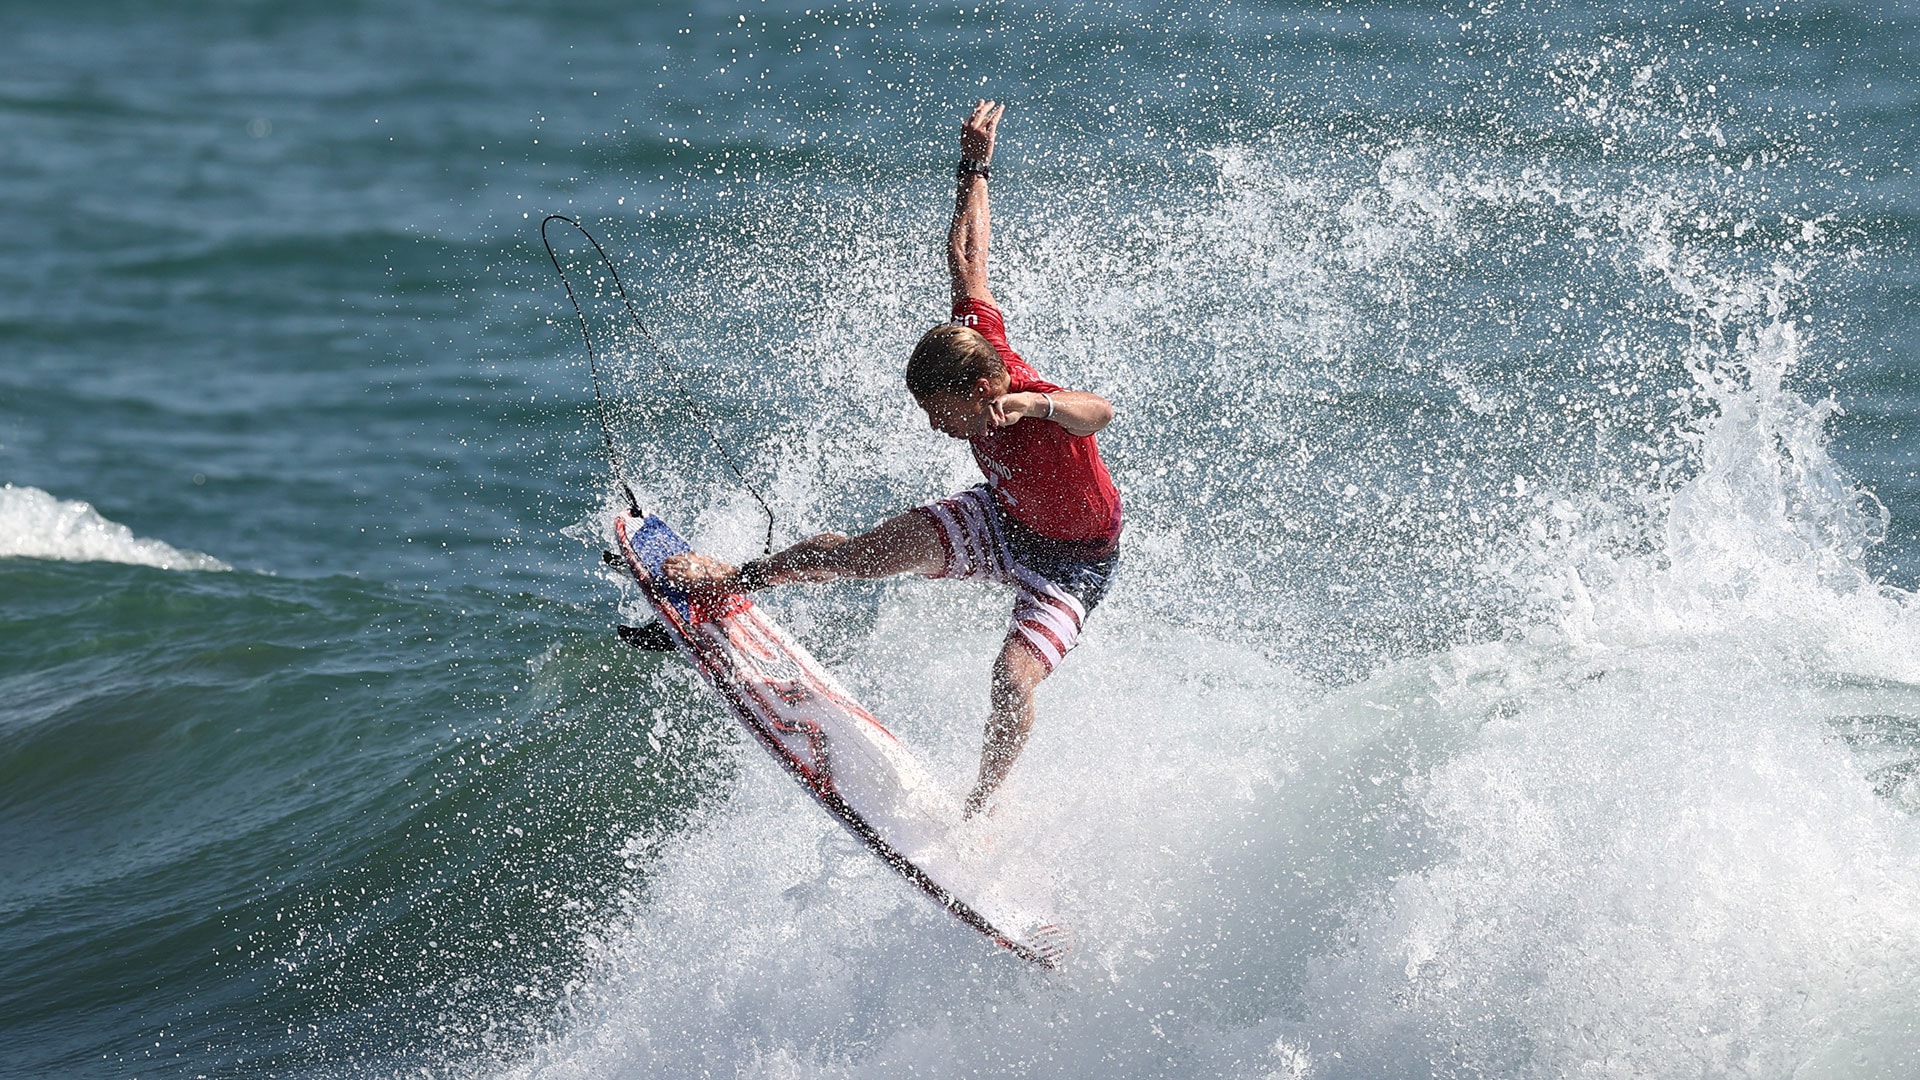 Kolohe Andino Advances Straight to Round 3 in Inaugural Olympic Surfing Contest